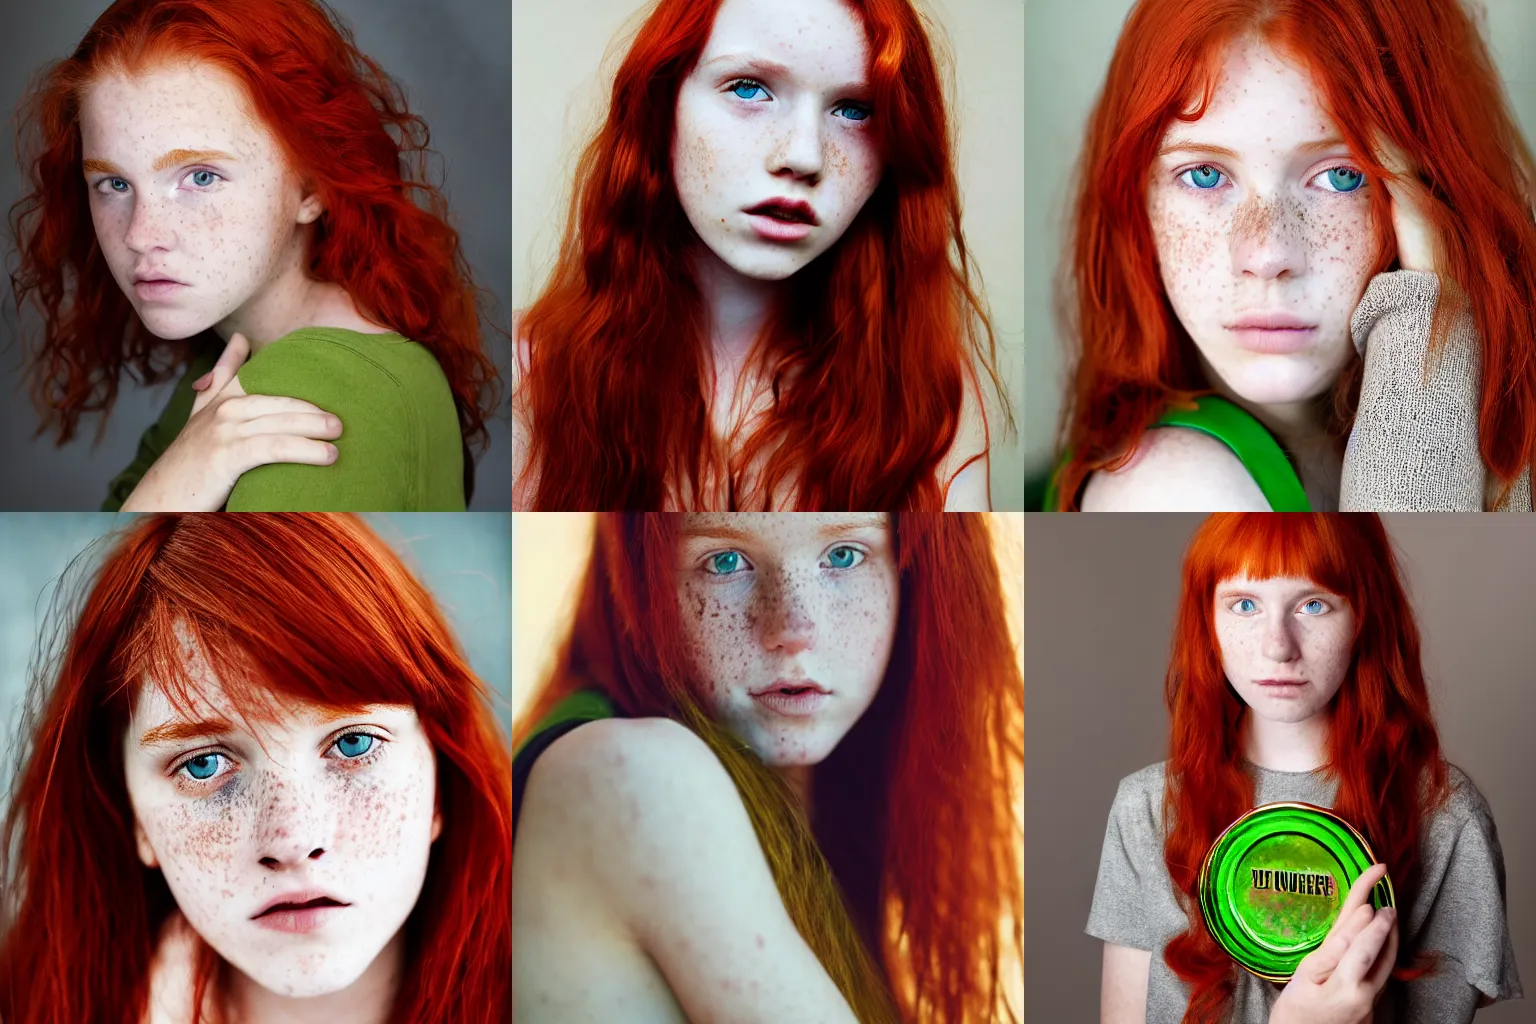 Prompt: A portrait photograph of a 15 year old girl, red hair, freckles, green eyes, award winning, stunning